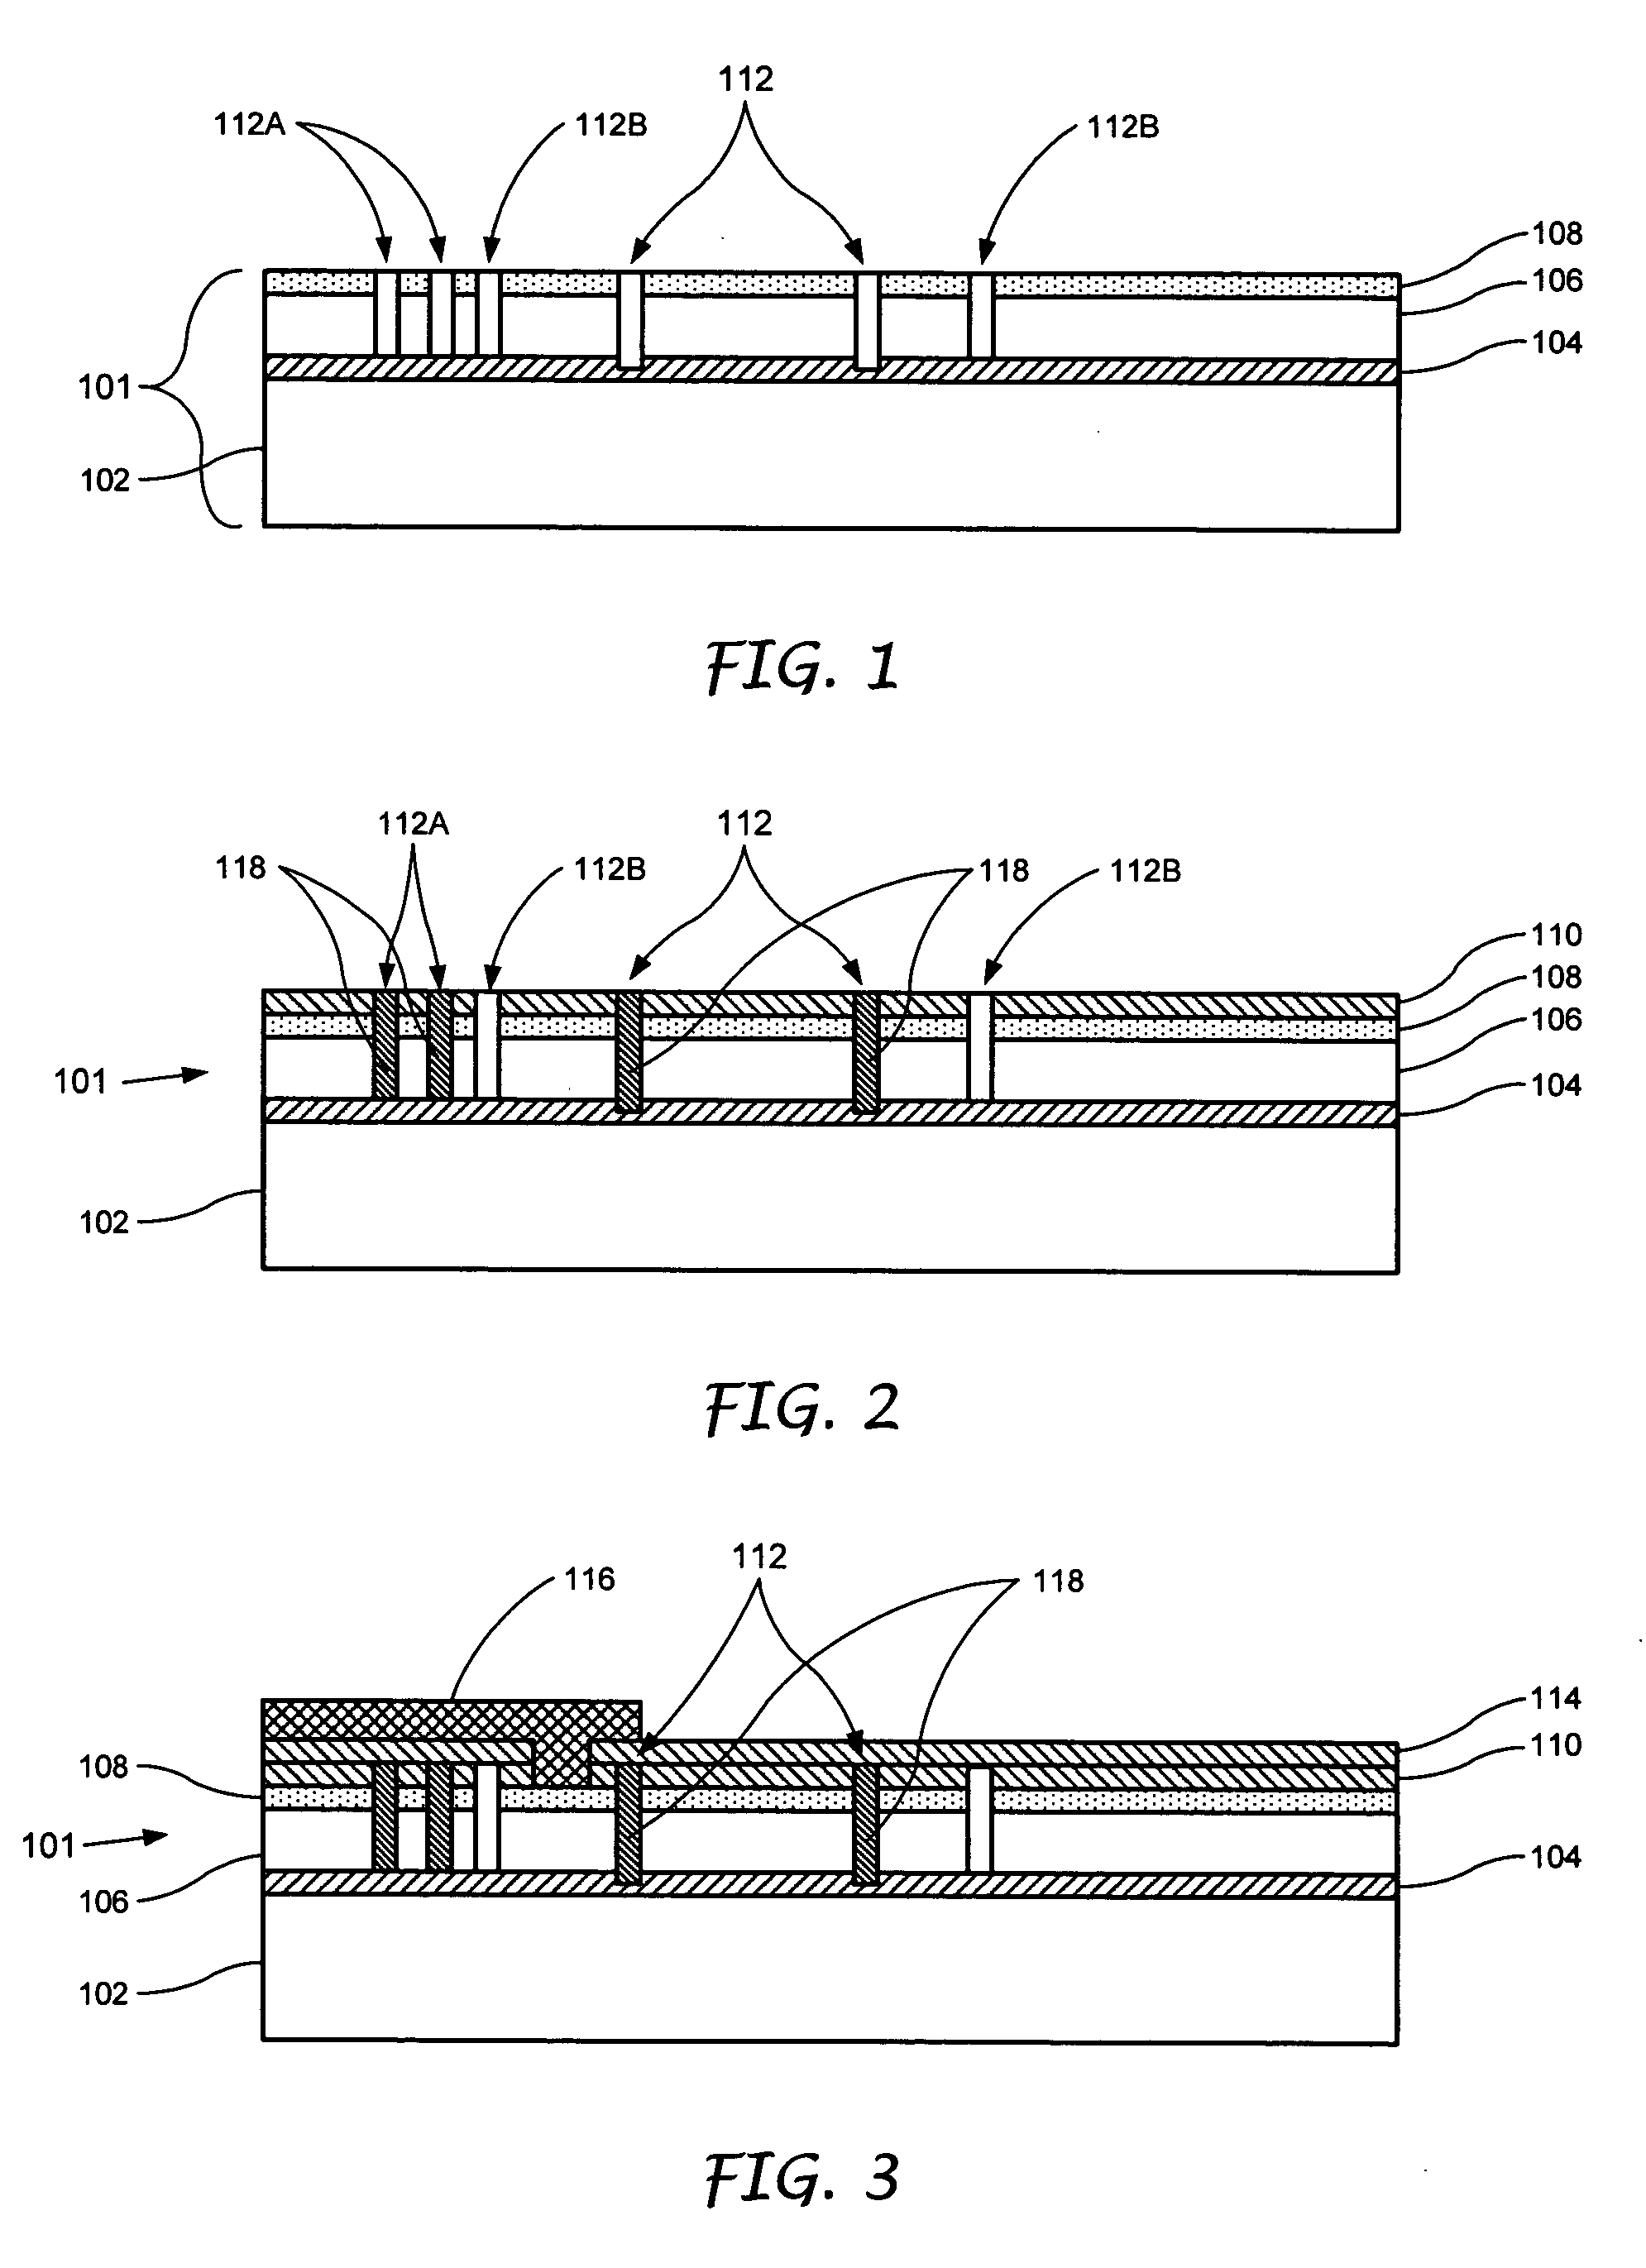 Method for forming anti-stiction bumps on a micro-electro mechanical structure